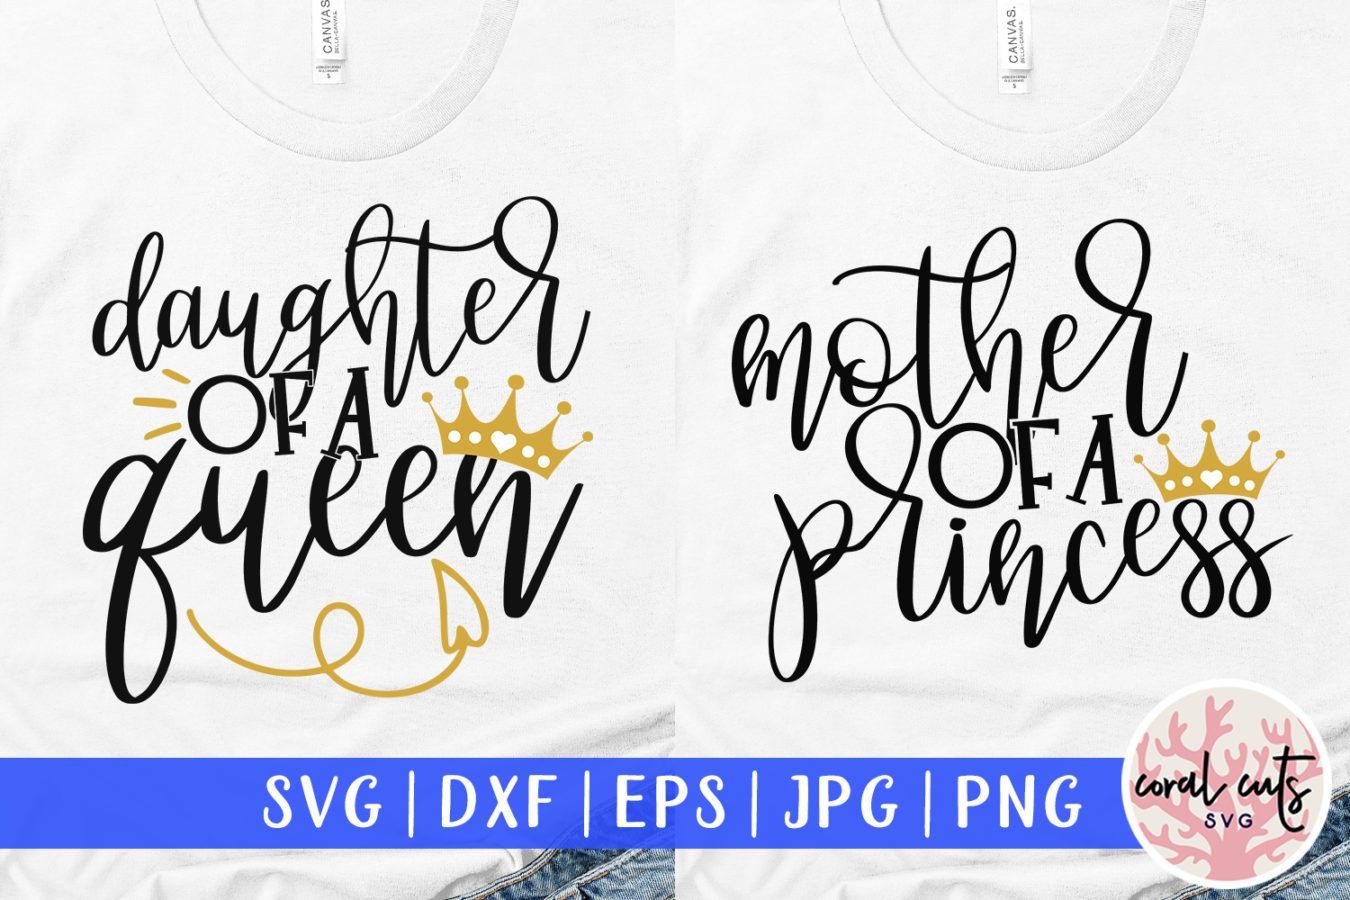 Download Mother Of A Princess And Daughter Of A Queen Mother Svg Eps Dxf Png Cutting Files So Fontsy